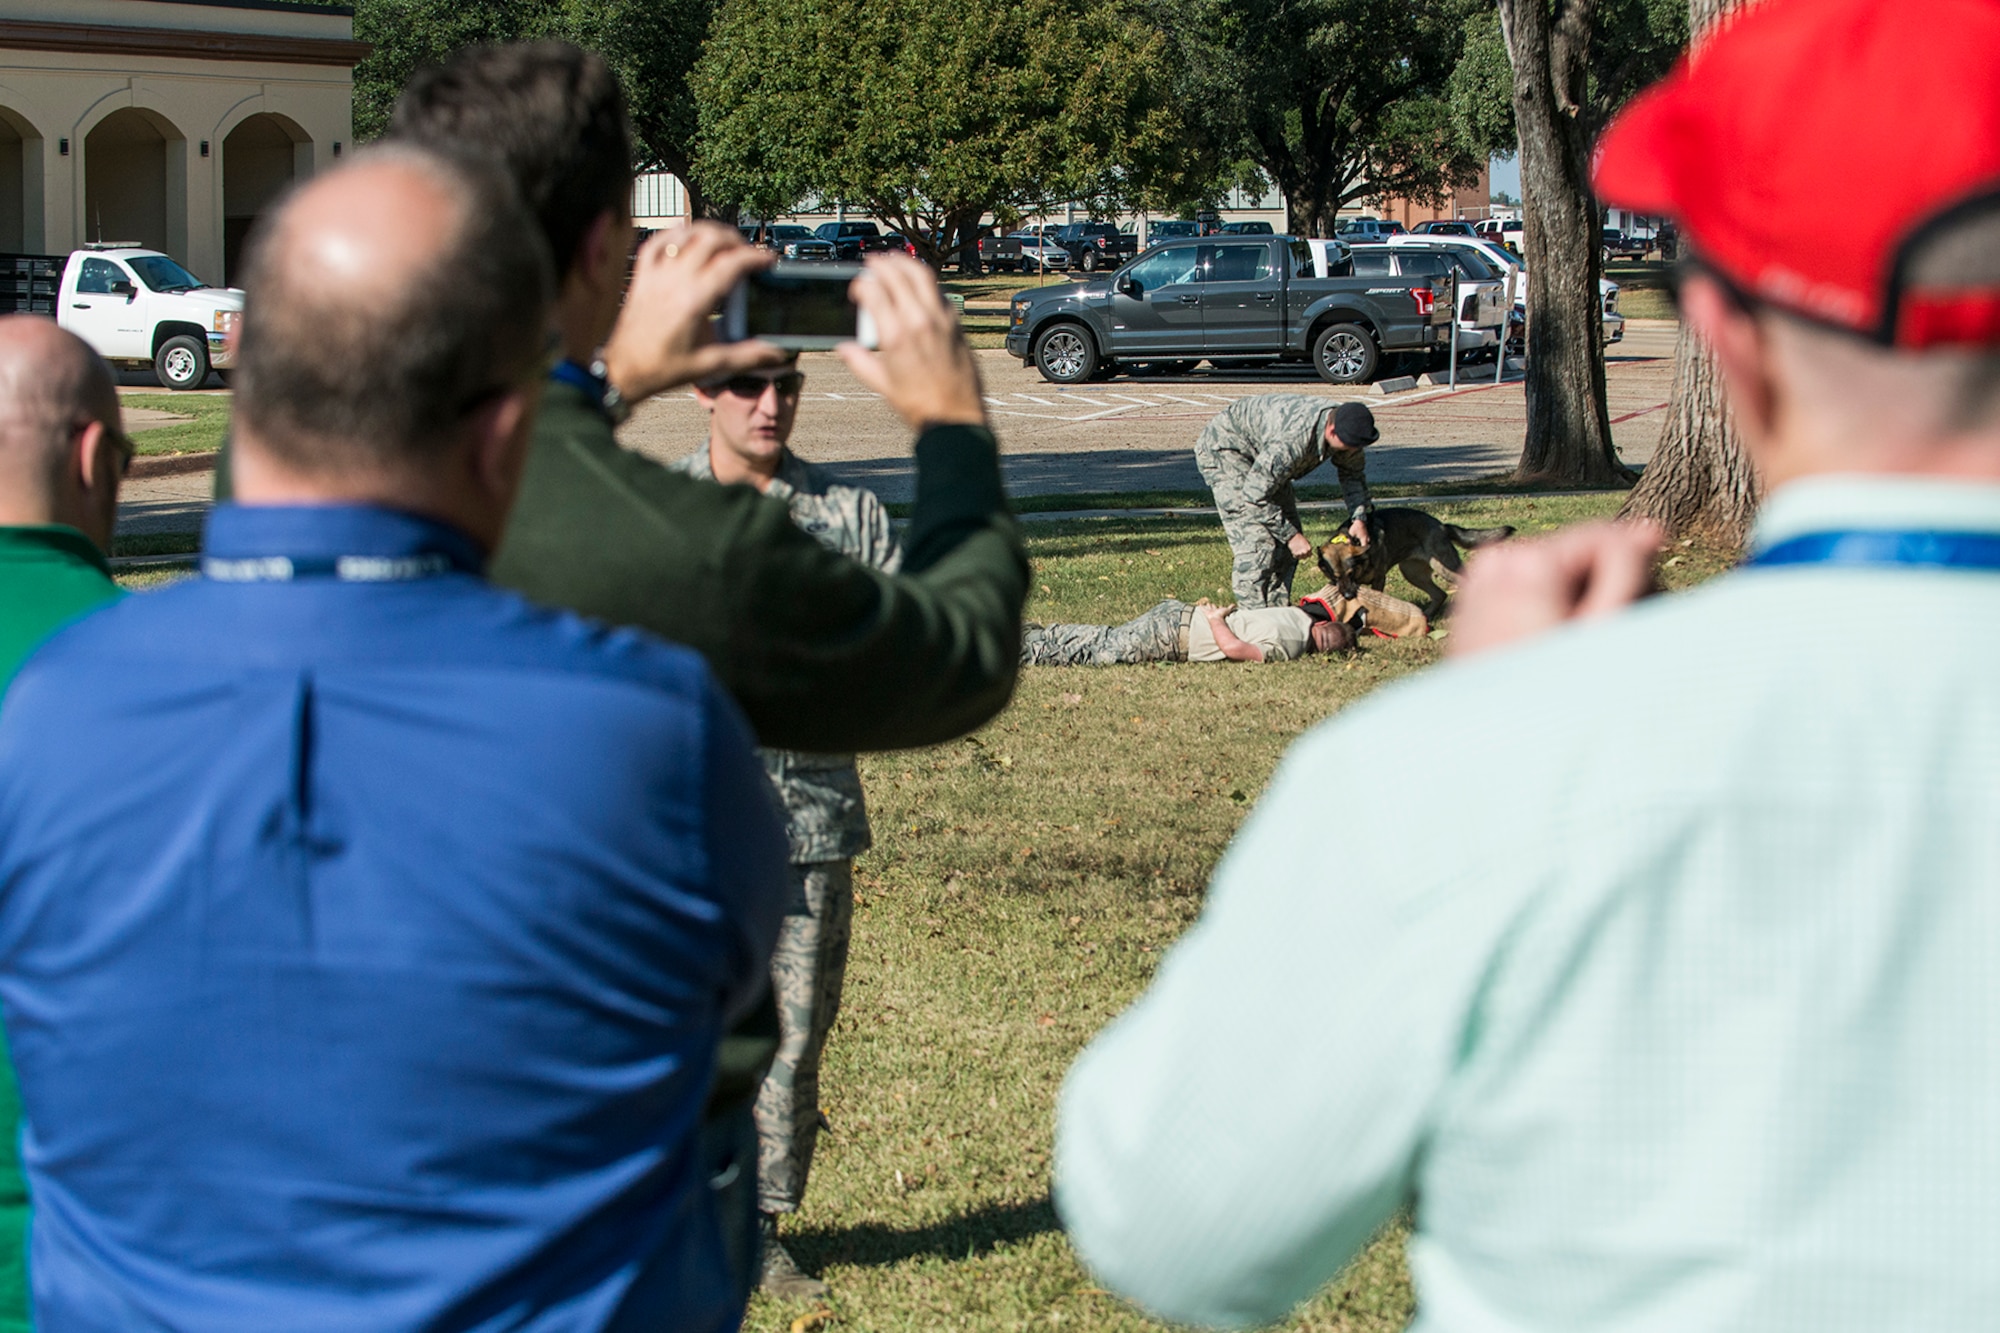 A group of civic leaders watch a 2nd Security Forces Squadron working dog demonstration during a tour of Barksdale Air Force Base, La., Oct. 27, 2016. The tour was hosted by the 433rd Airlift Wing from Lackland Air Force Base, Texas, and travel to Barksdale to get first hand look at the different missions throughout the Air Force Reserve Command. (U.S. Air Force photo by Master Sgt. Greg Steele/Released)